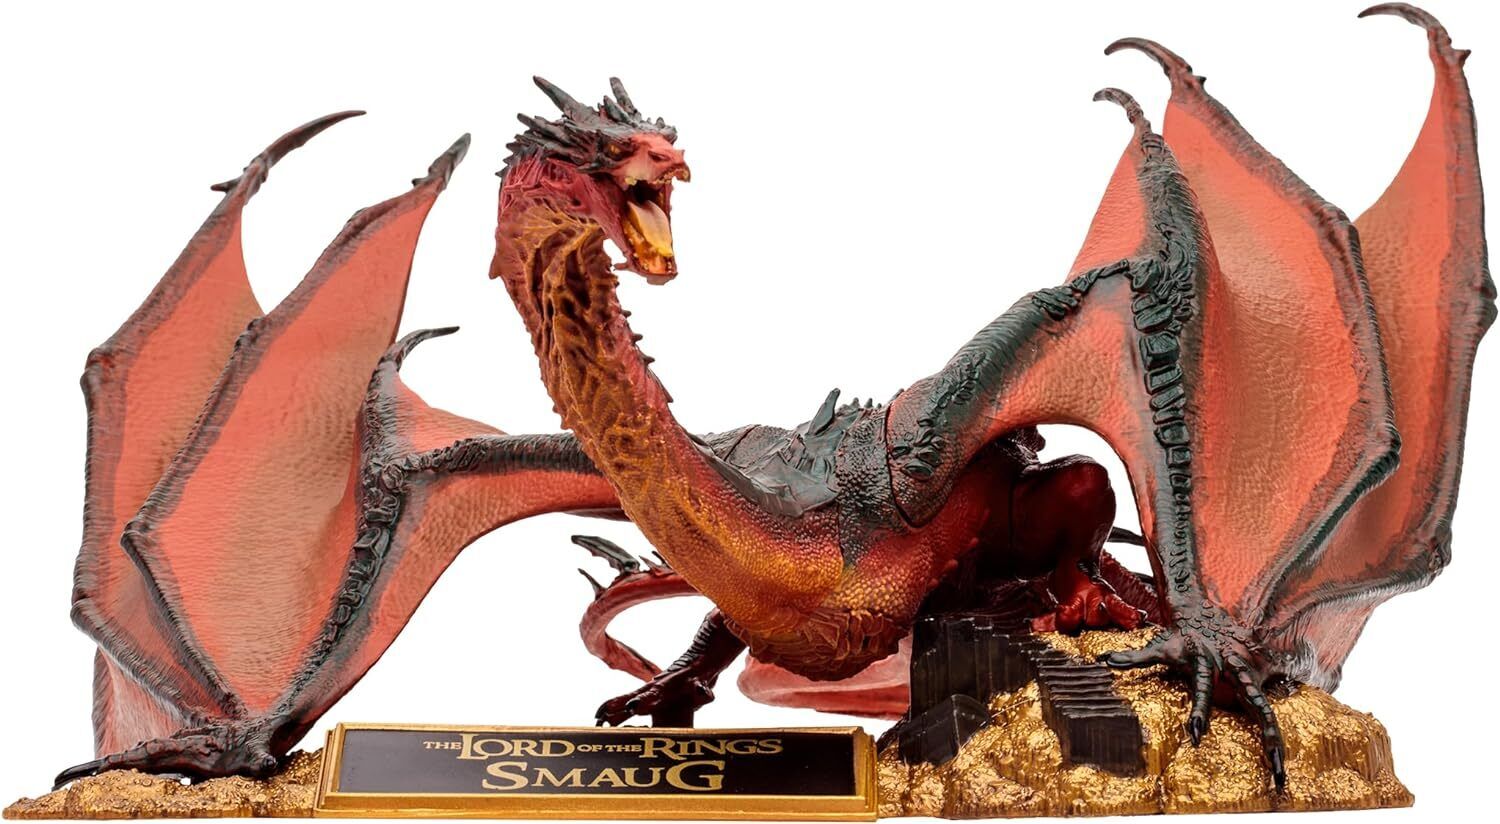 Figure Hobbit McFarlane's Dragons Smaug Statue The Lord of the Rings Figurines